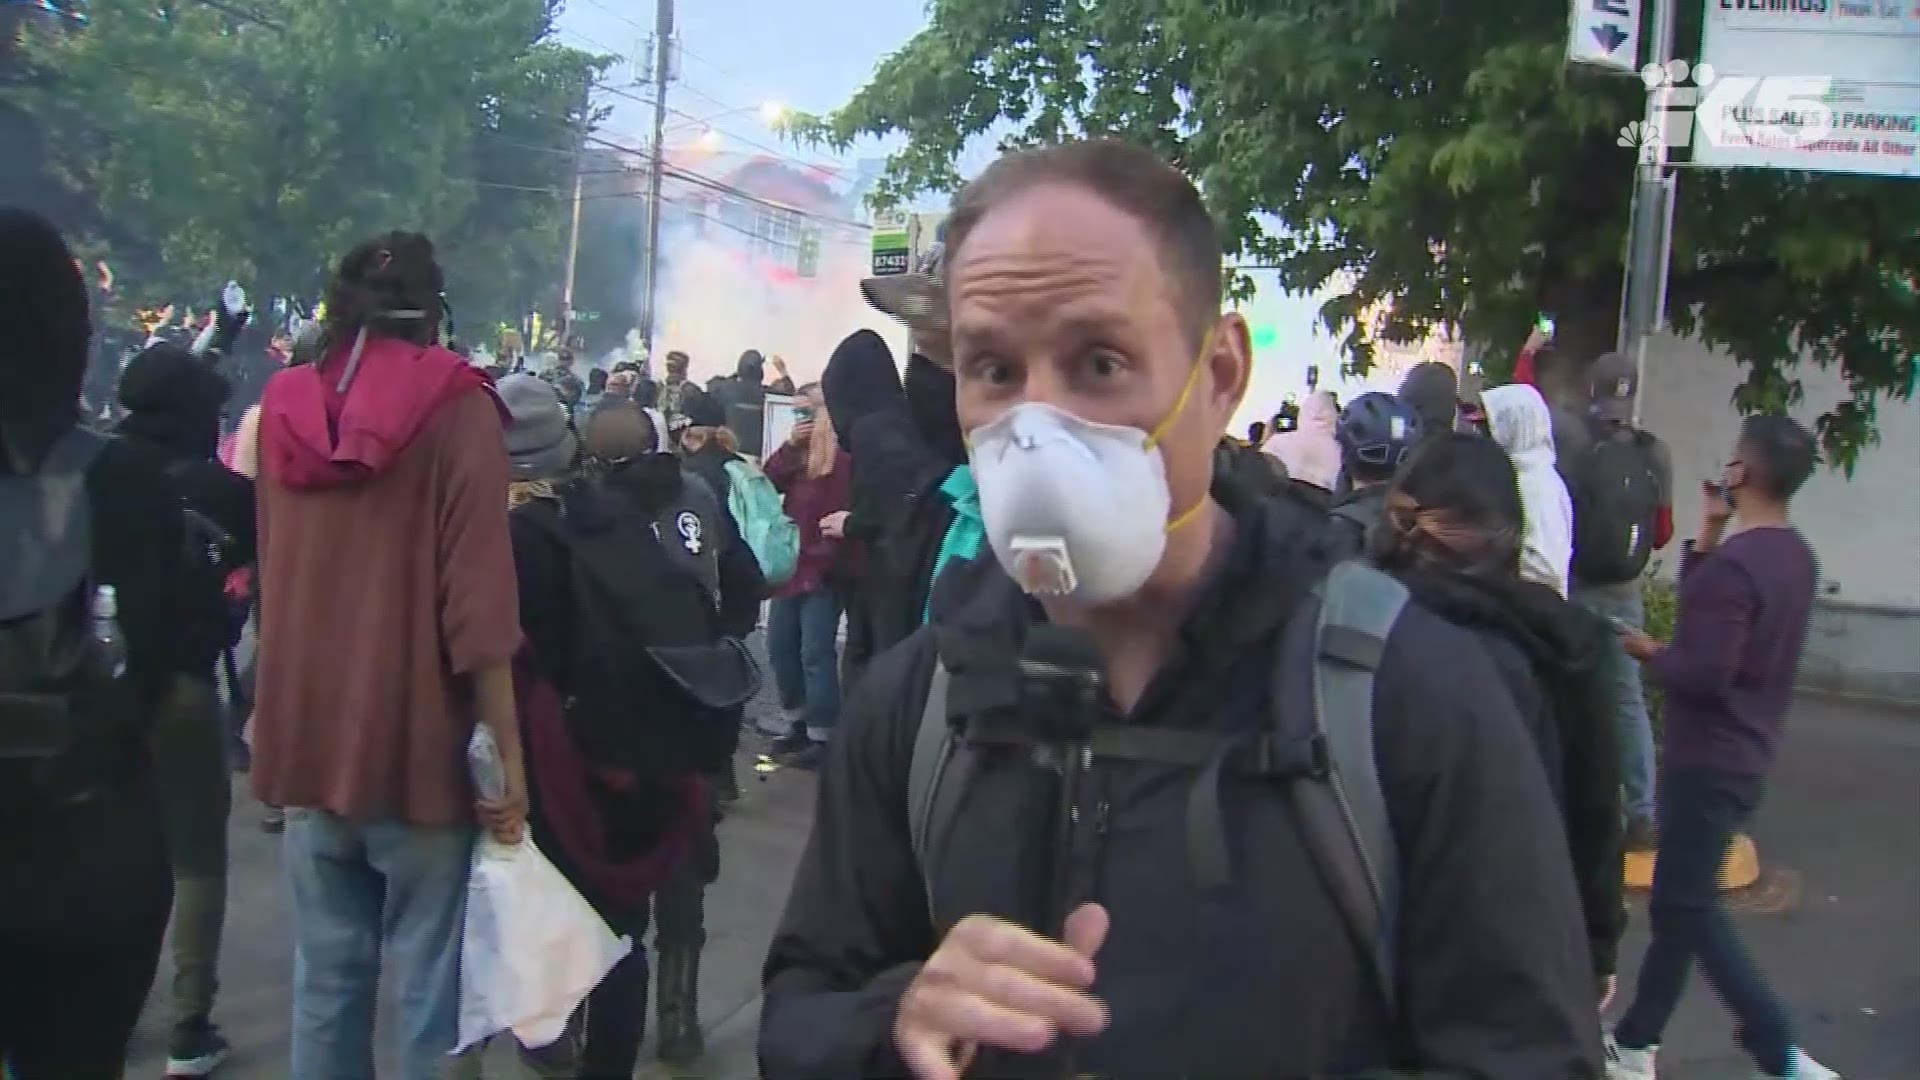 KING 5 reporter Ted Land was on the ground in Capitol Hill when tear gas and flashbangs were deployed in what was ultimately labeled a "riot" by police.